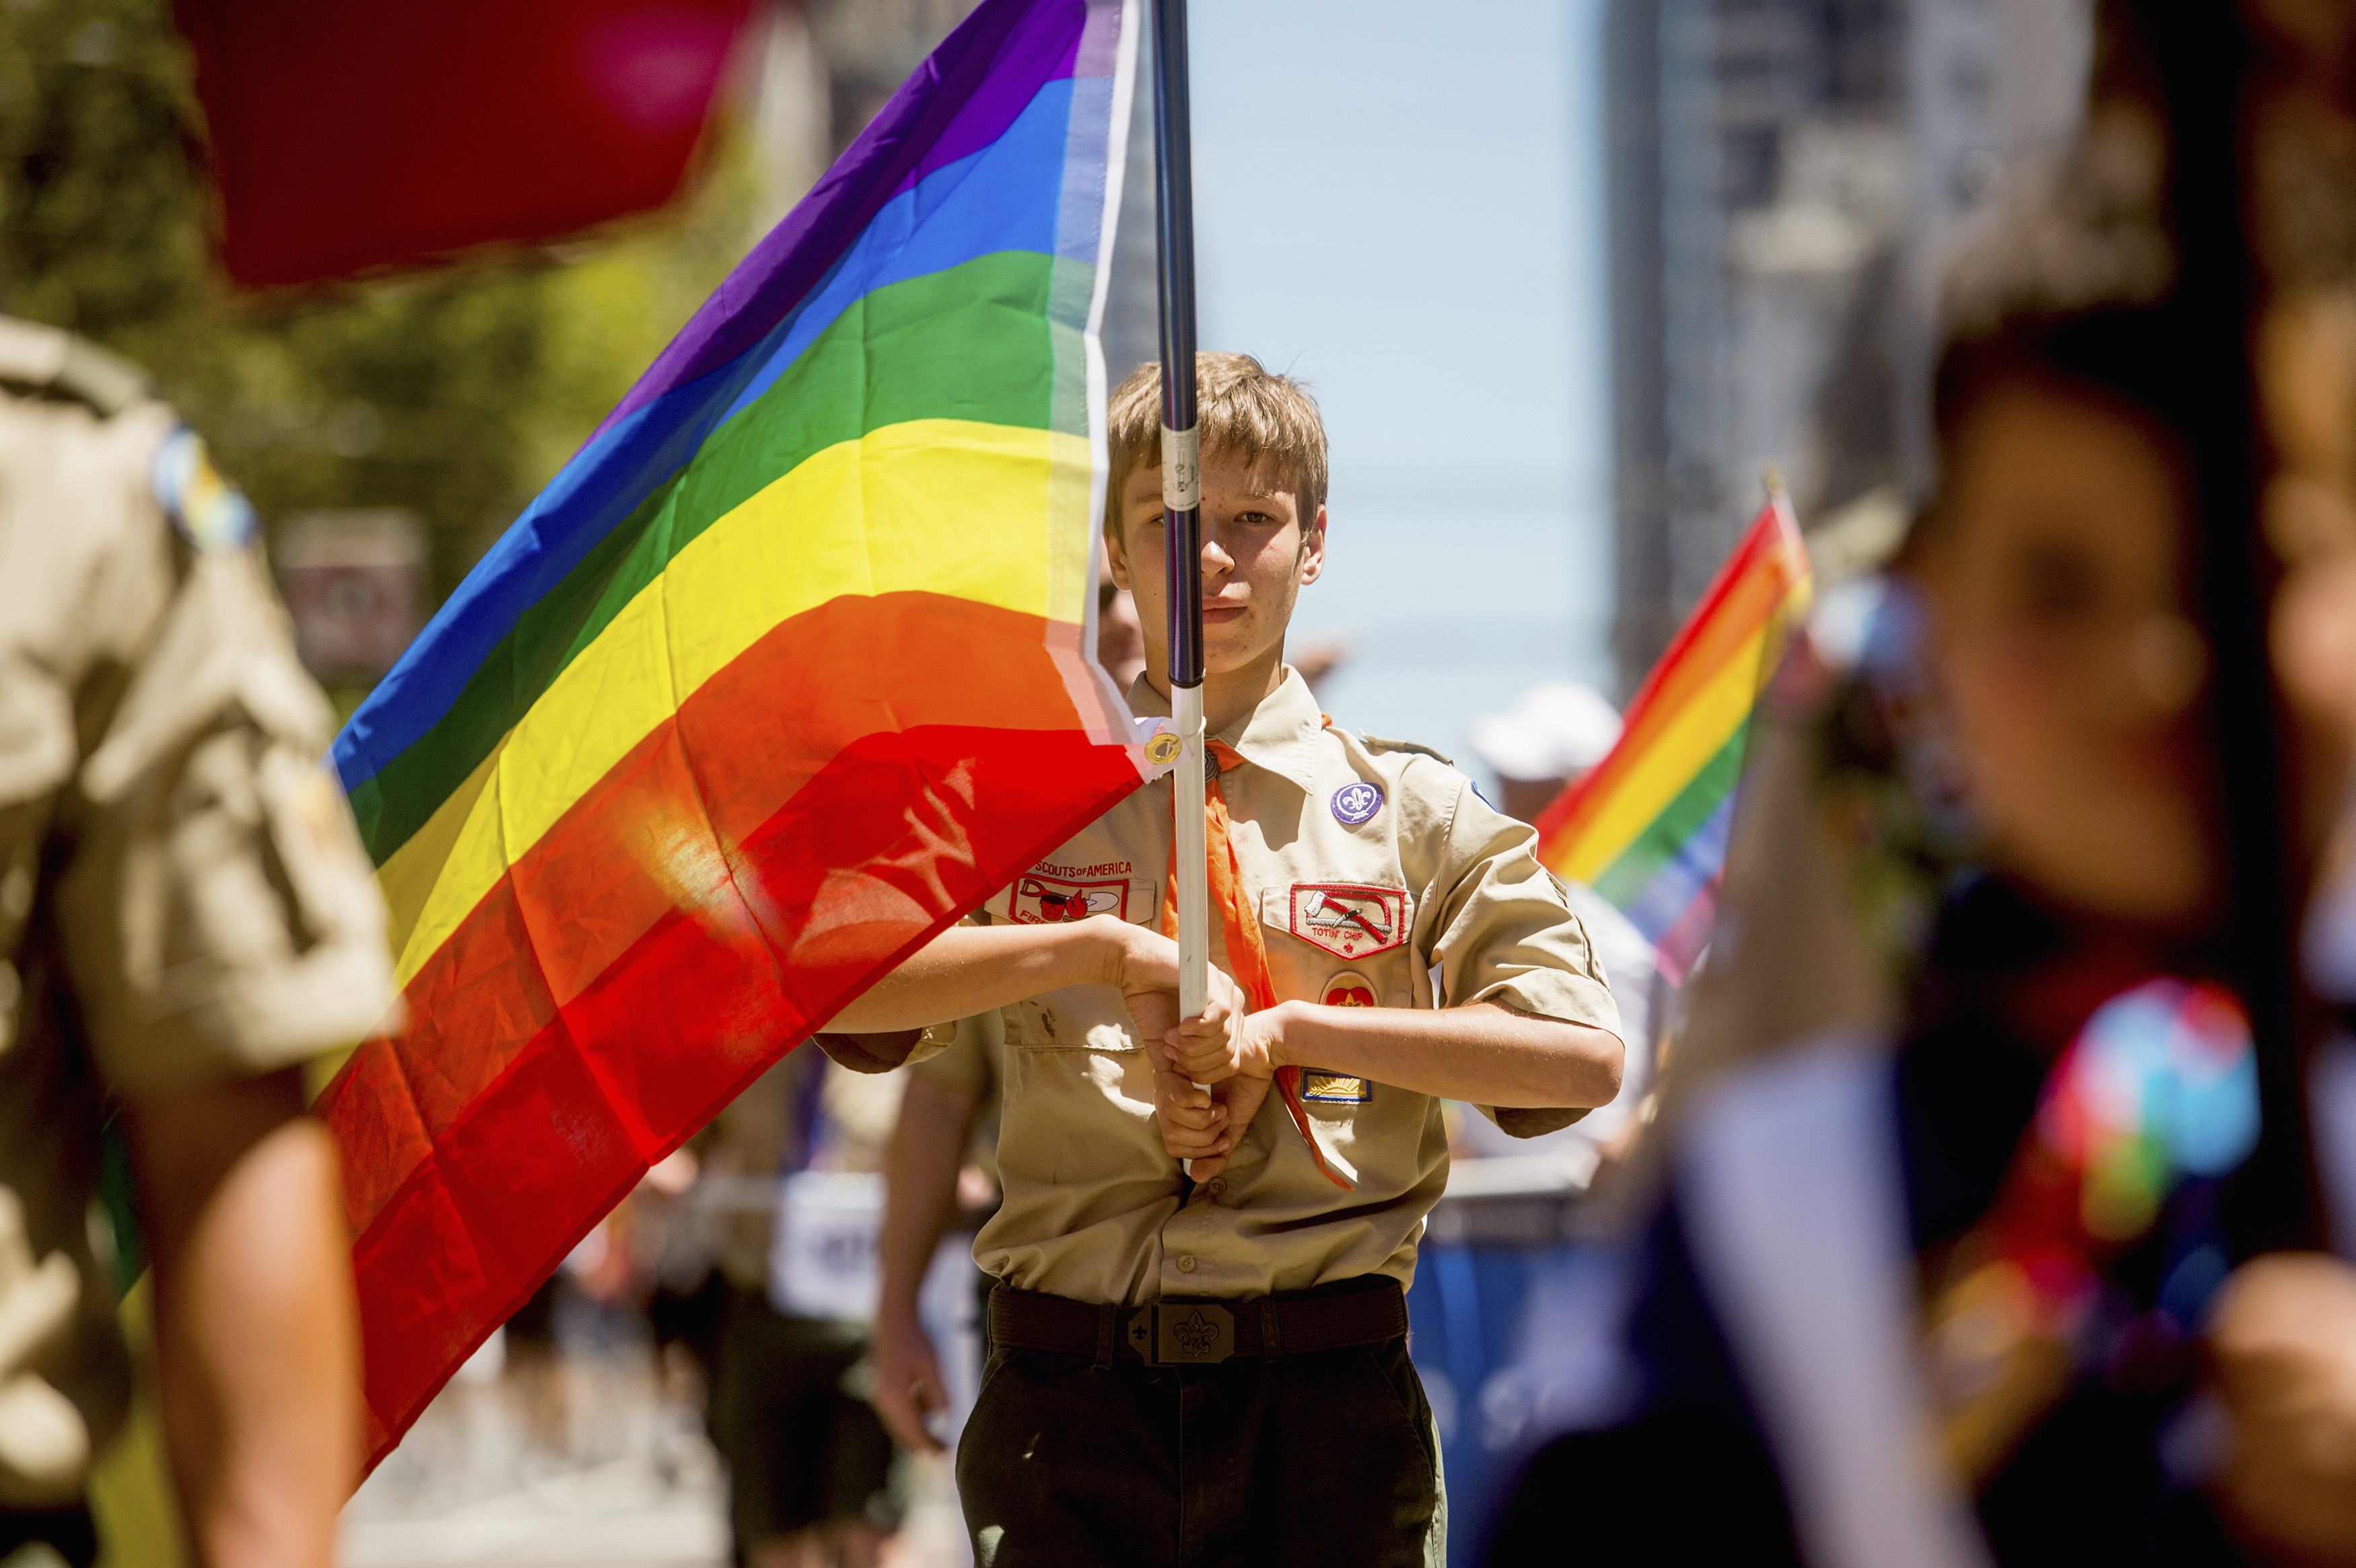 donations-drop-for-boy-scouts-in-utah-after-gay-leader-decision-cbs-news